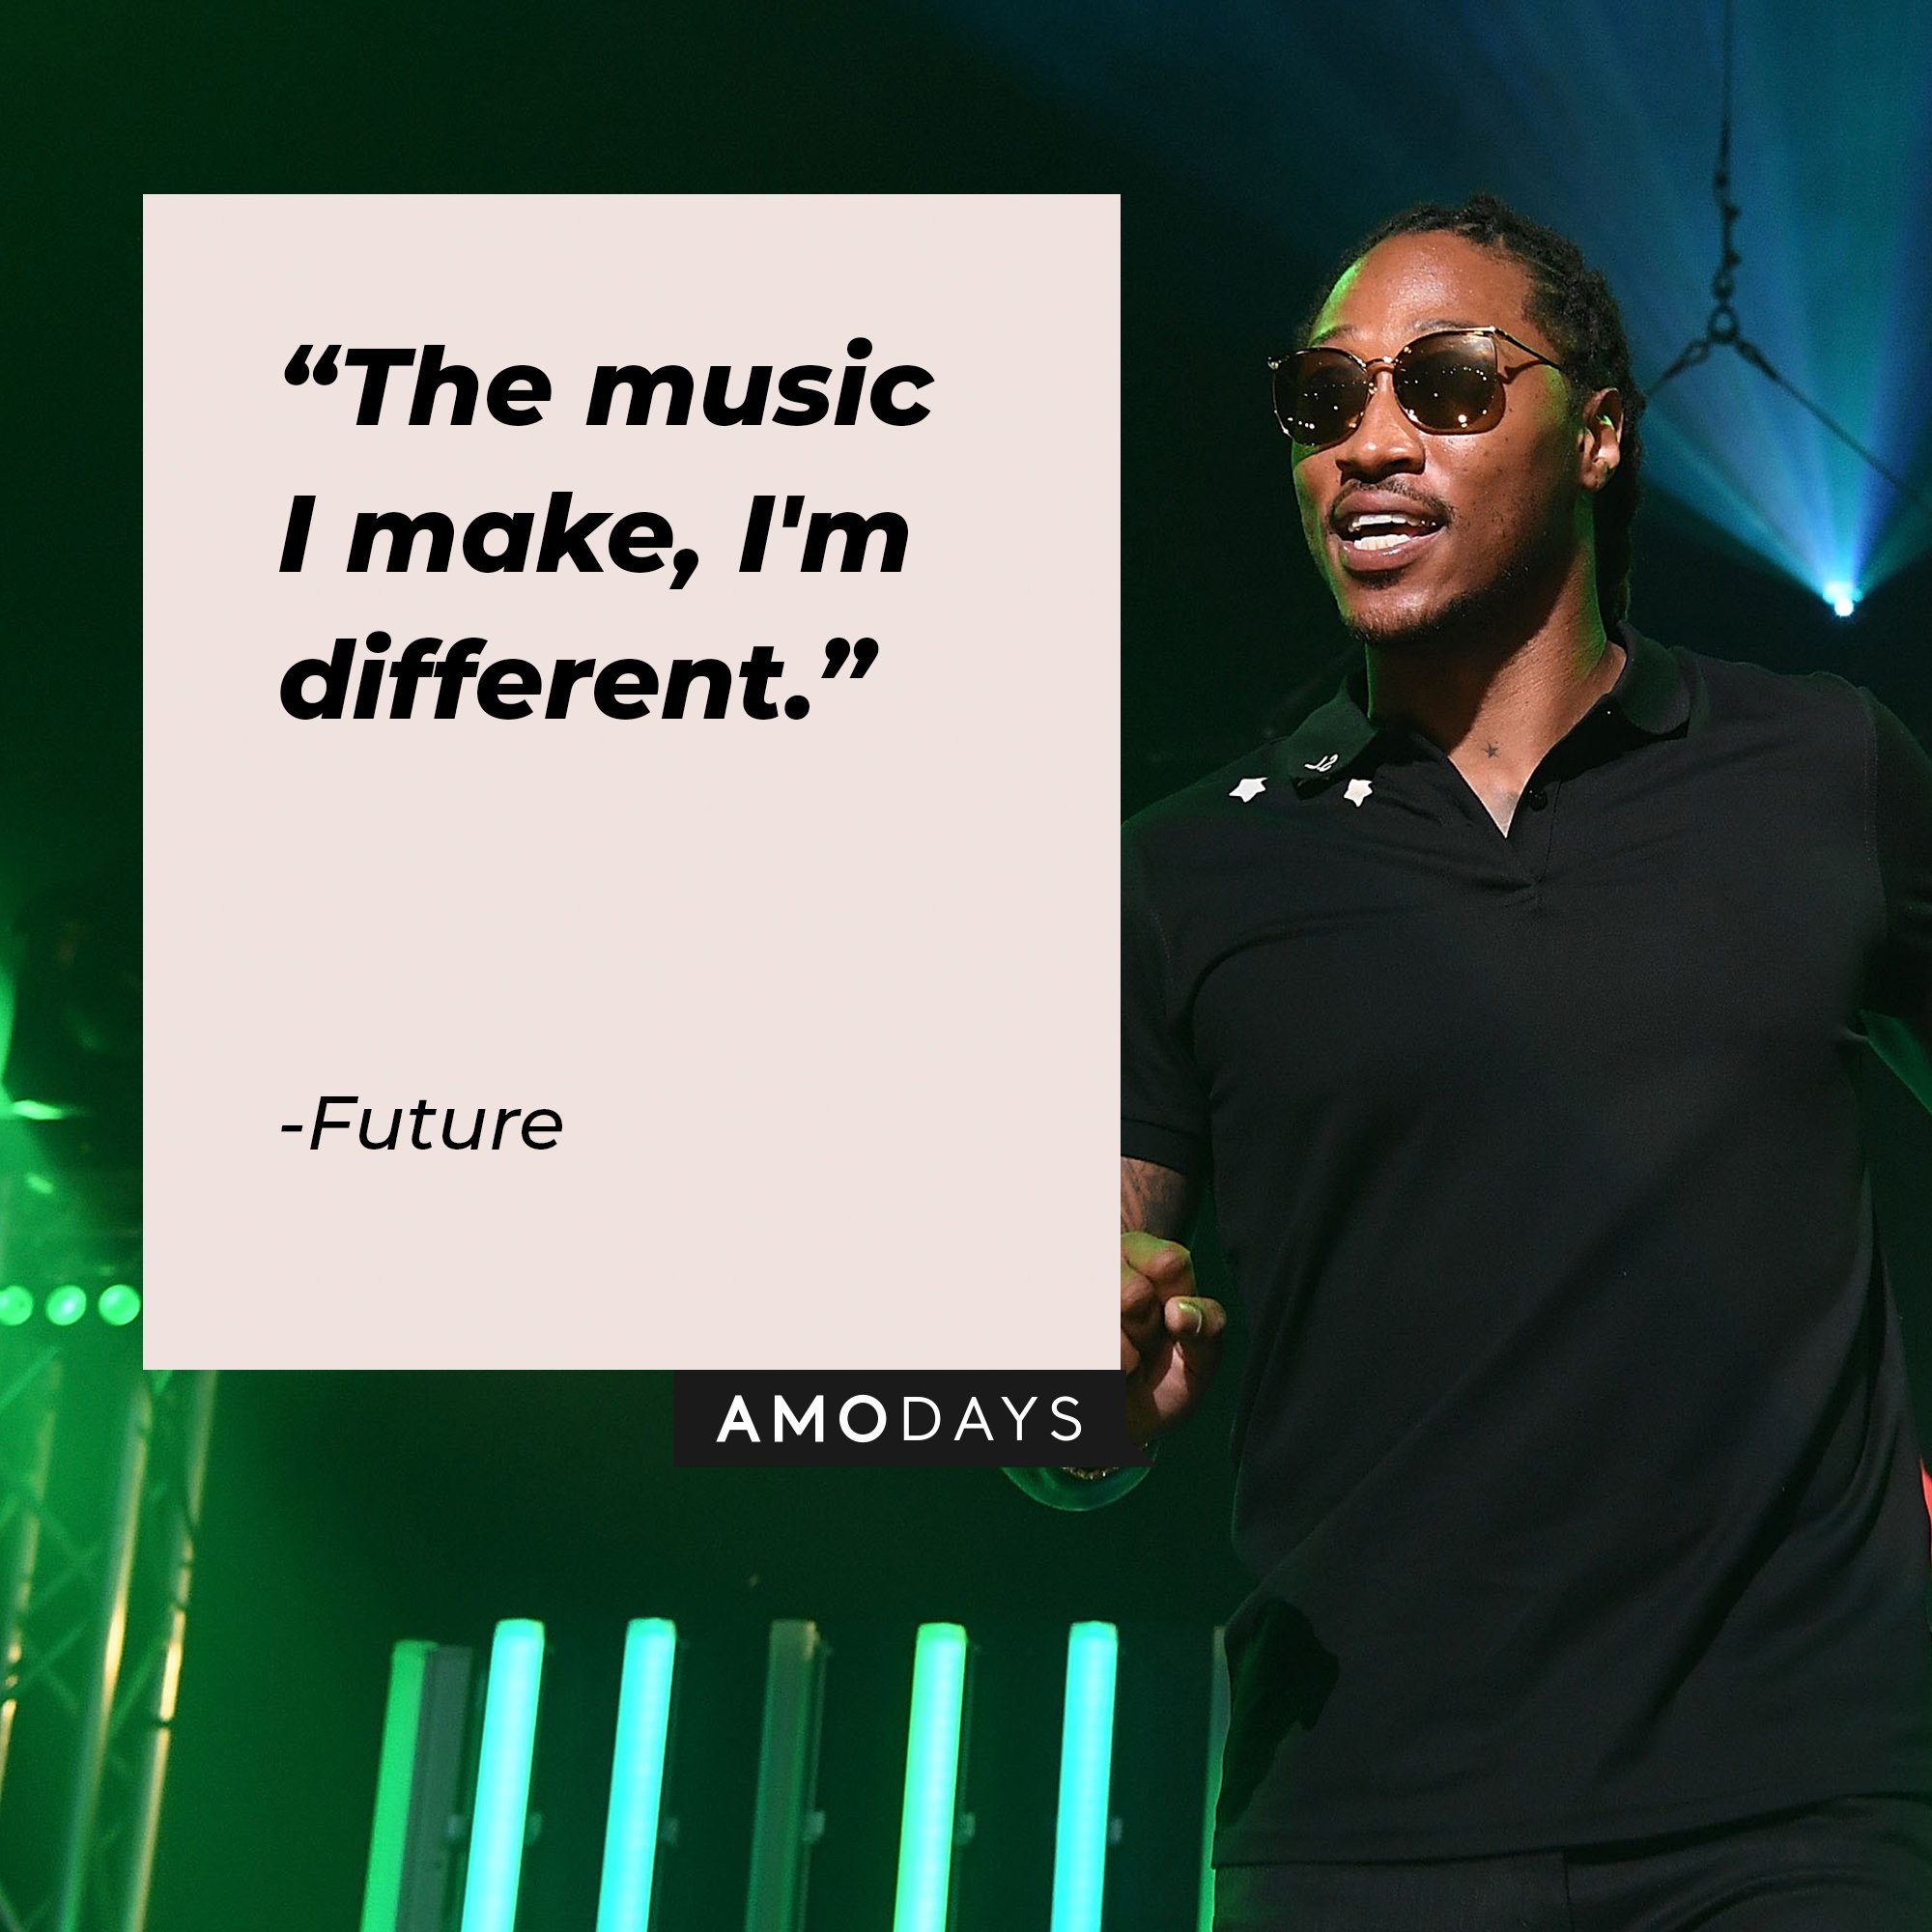 Future’s quote: "The music I make, I'm different." | Image: AmoDays